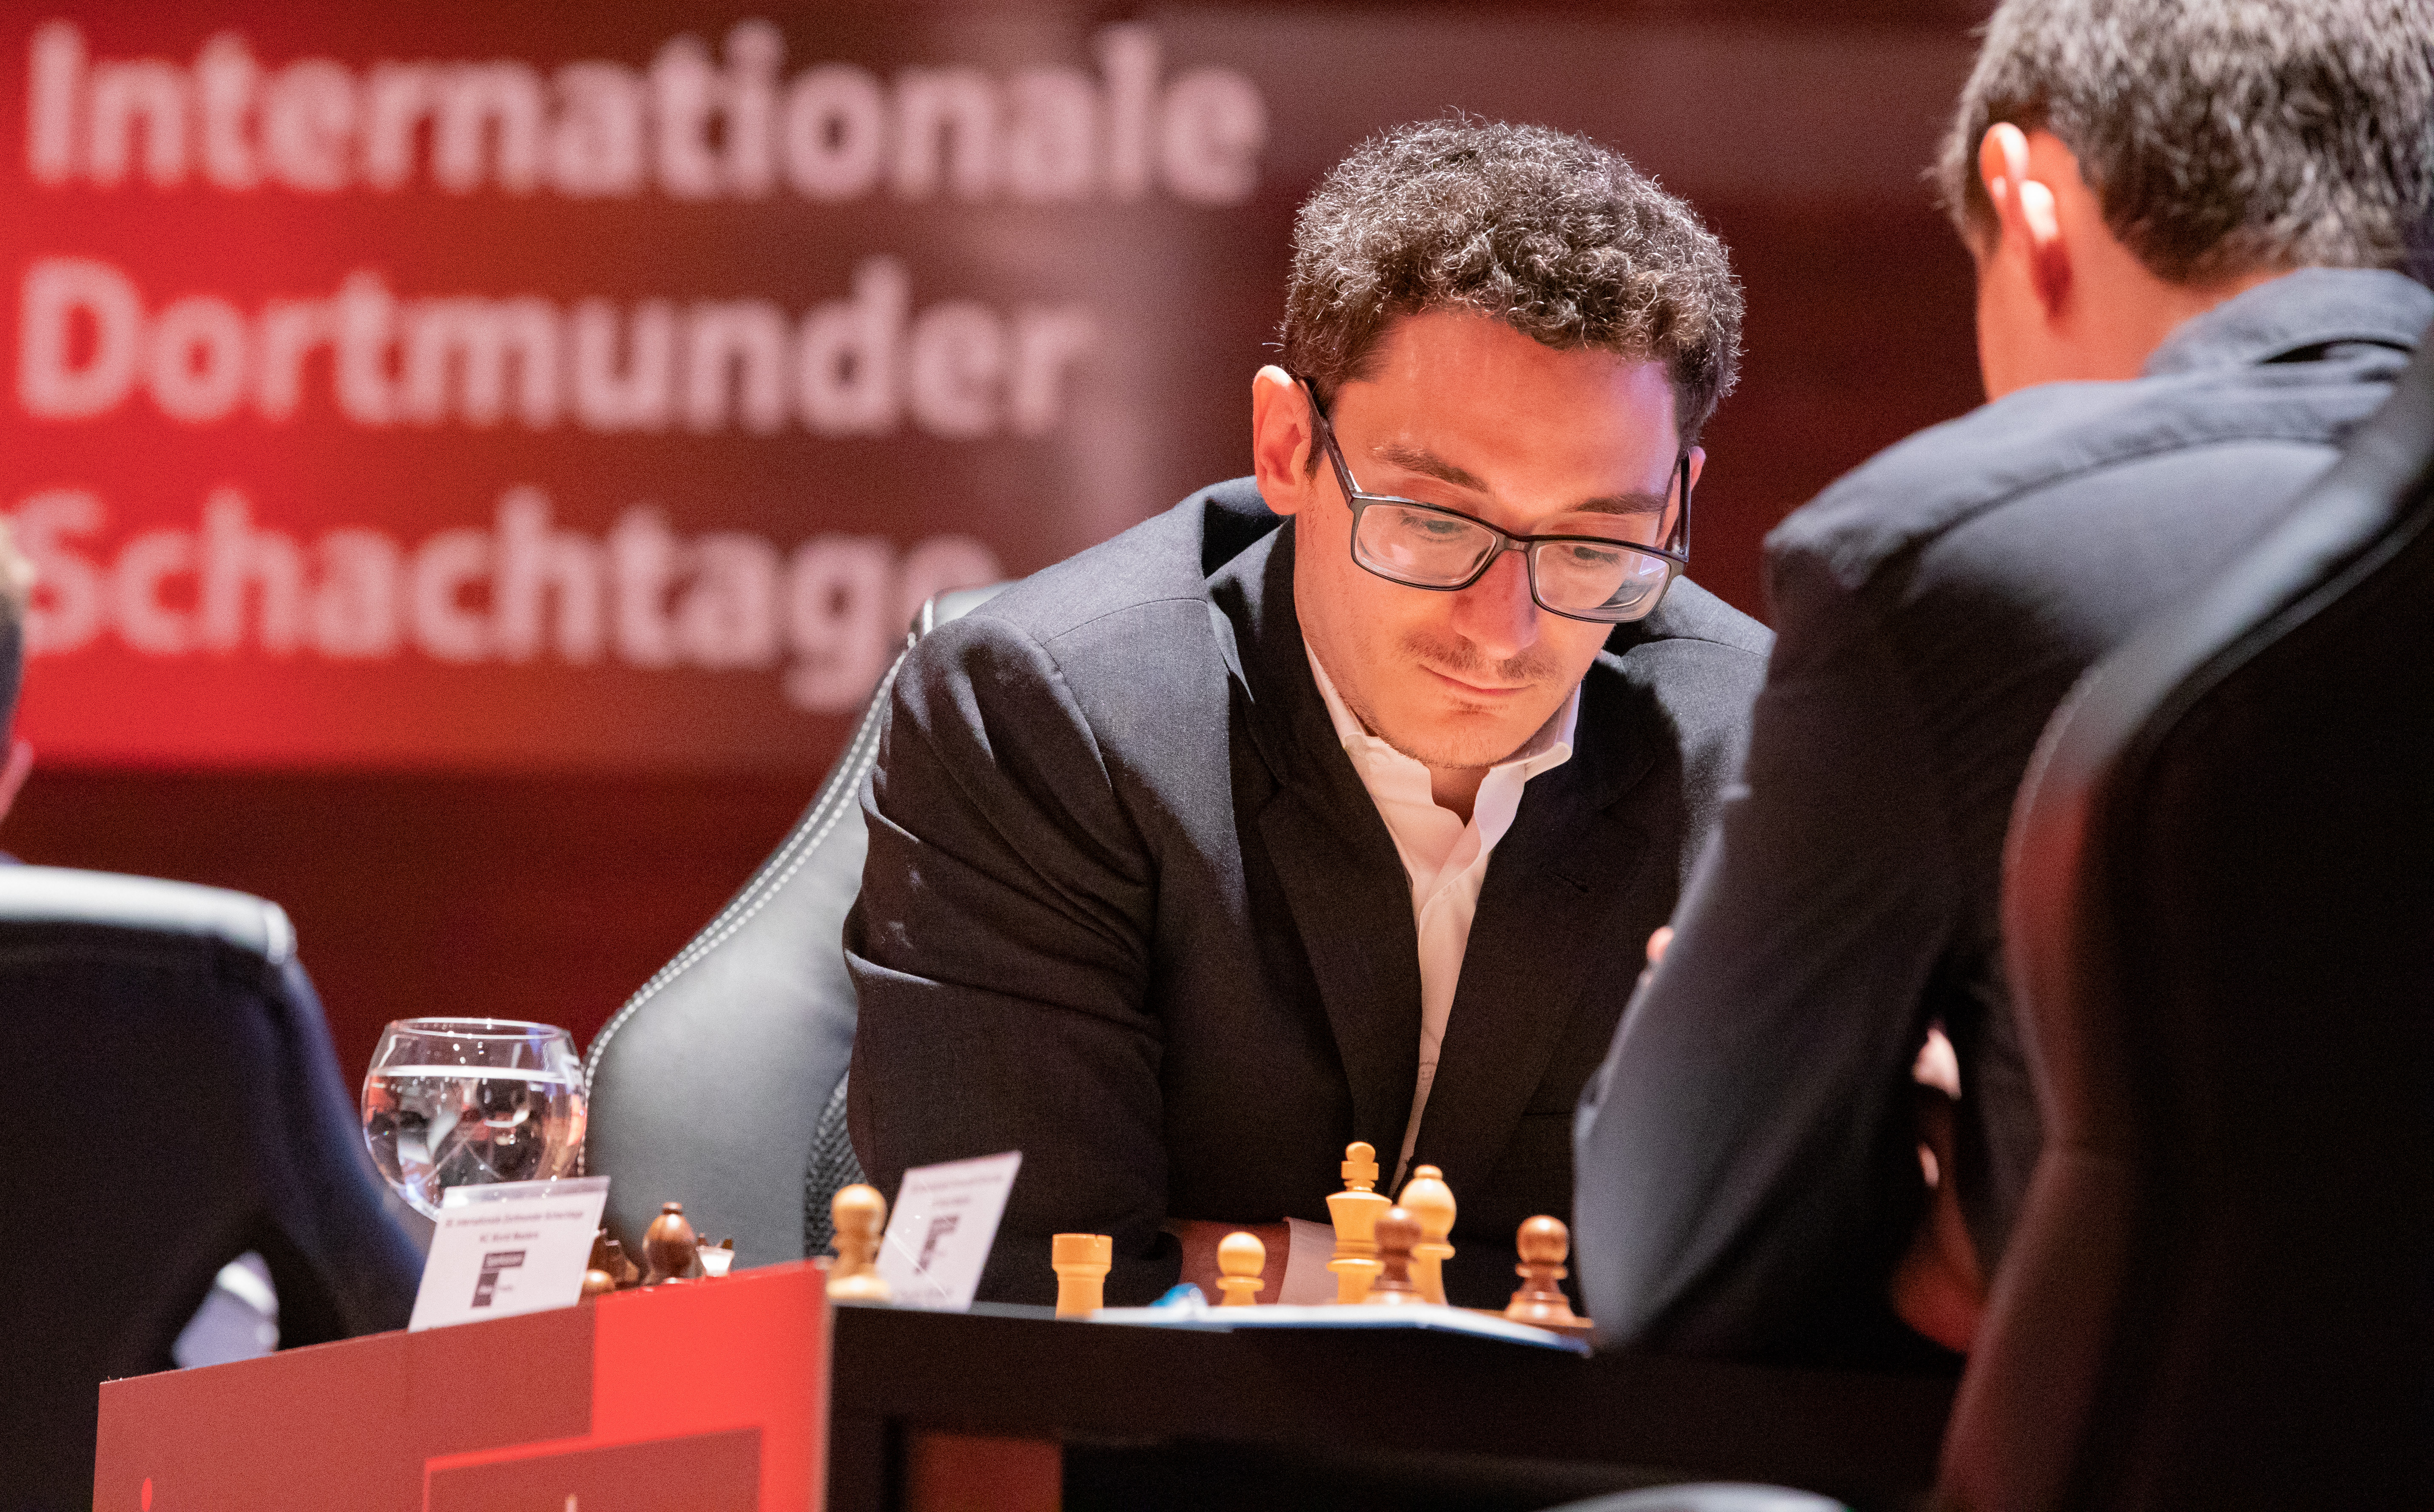 Caruana with a happy draw against Kollars